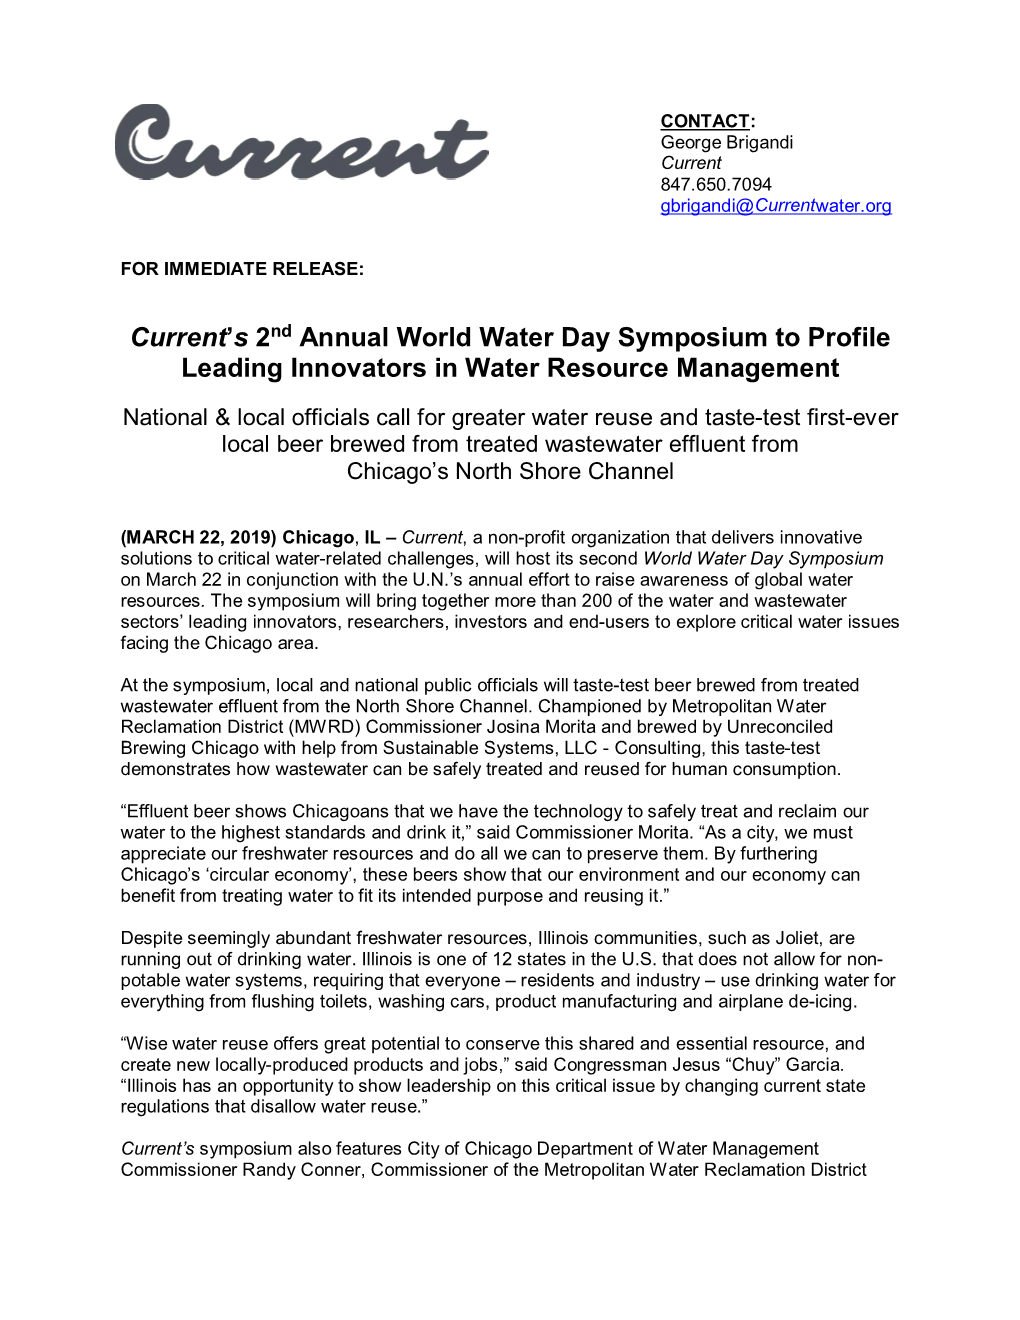 Current's 2Nd Annual World Water Day Symposium to Profile Leading Innovators in Water Resource Management